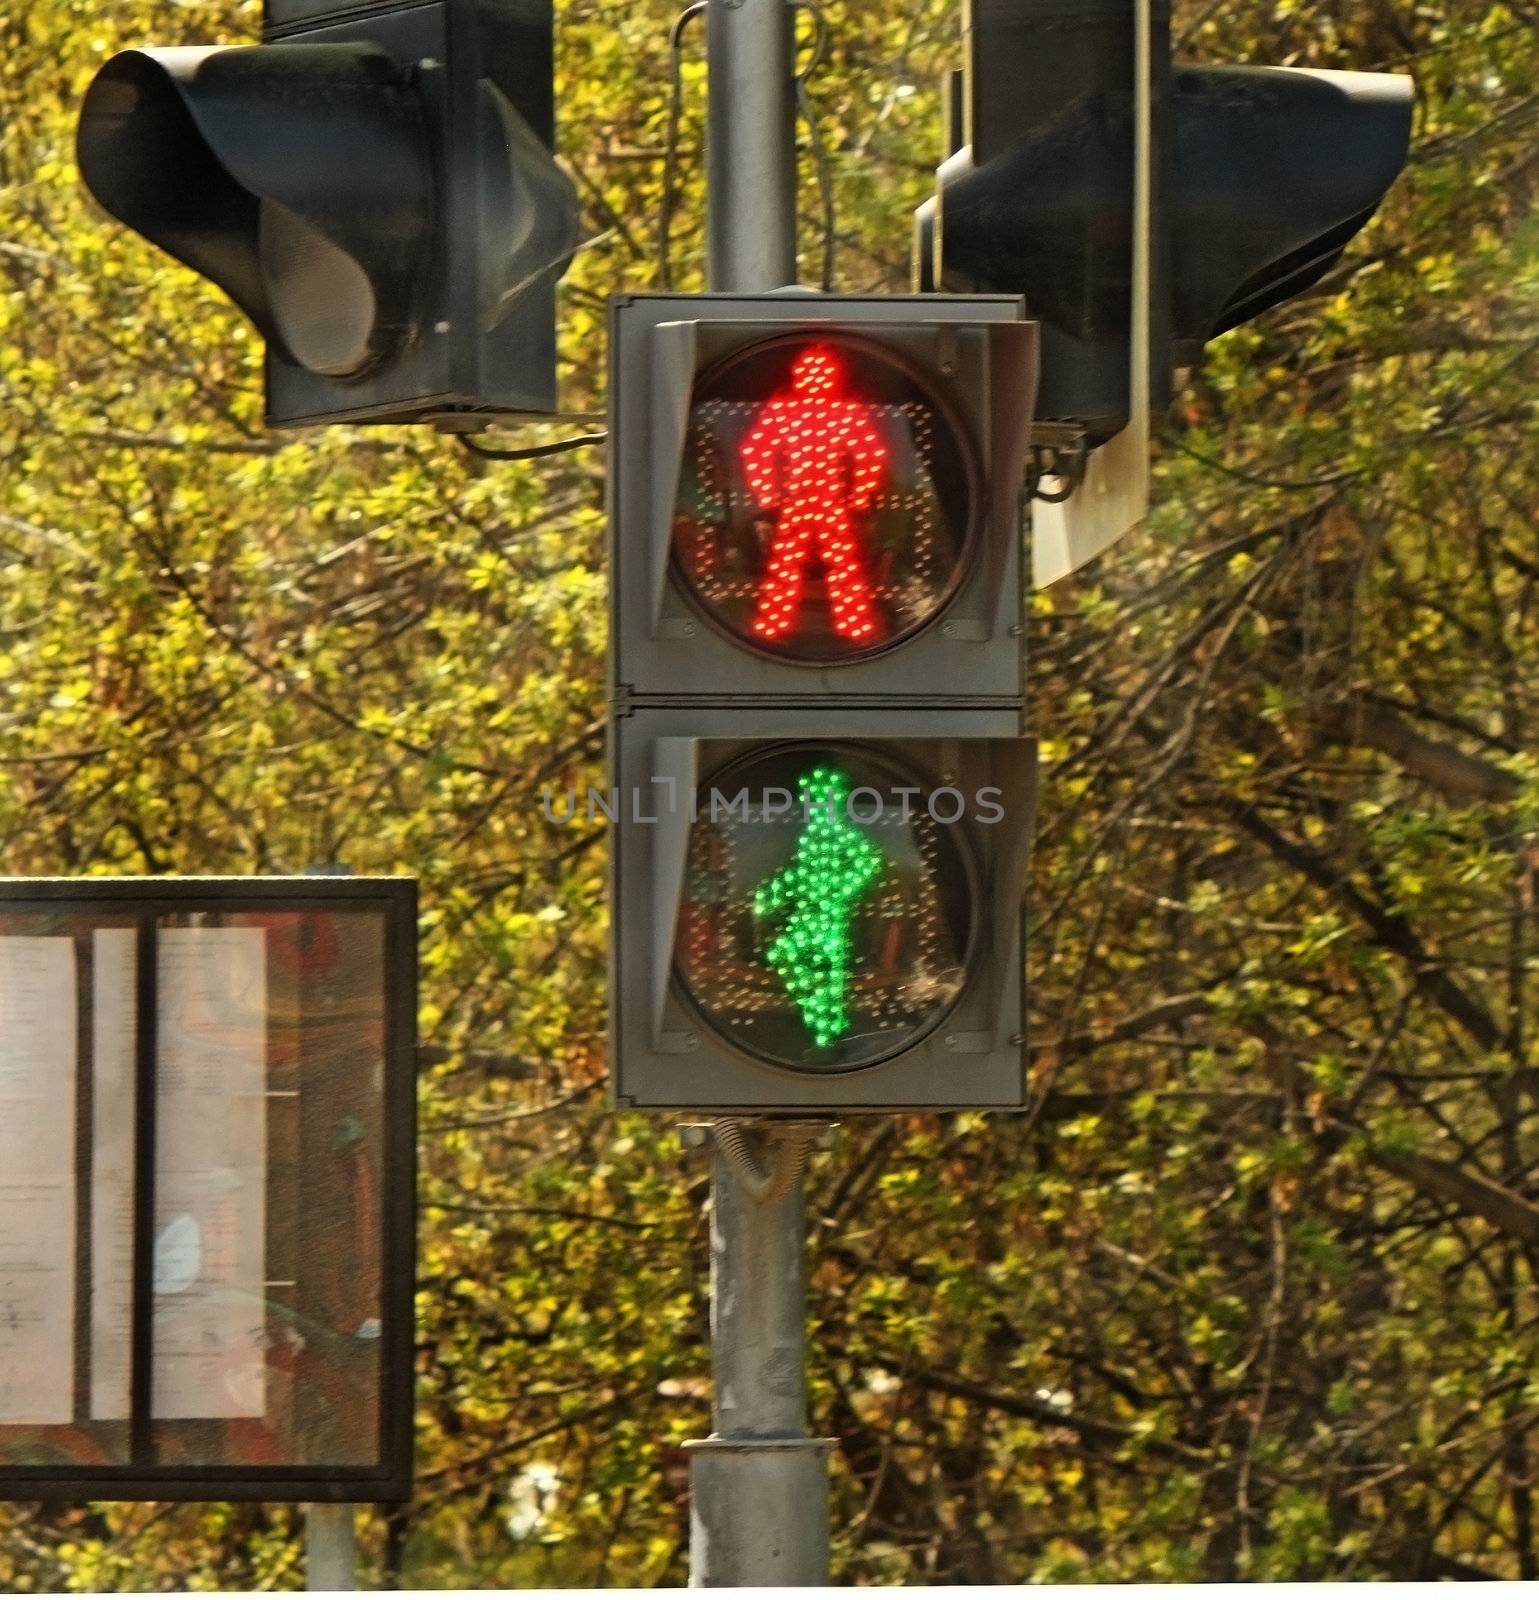 Pedestrian traffic light with red and green lights